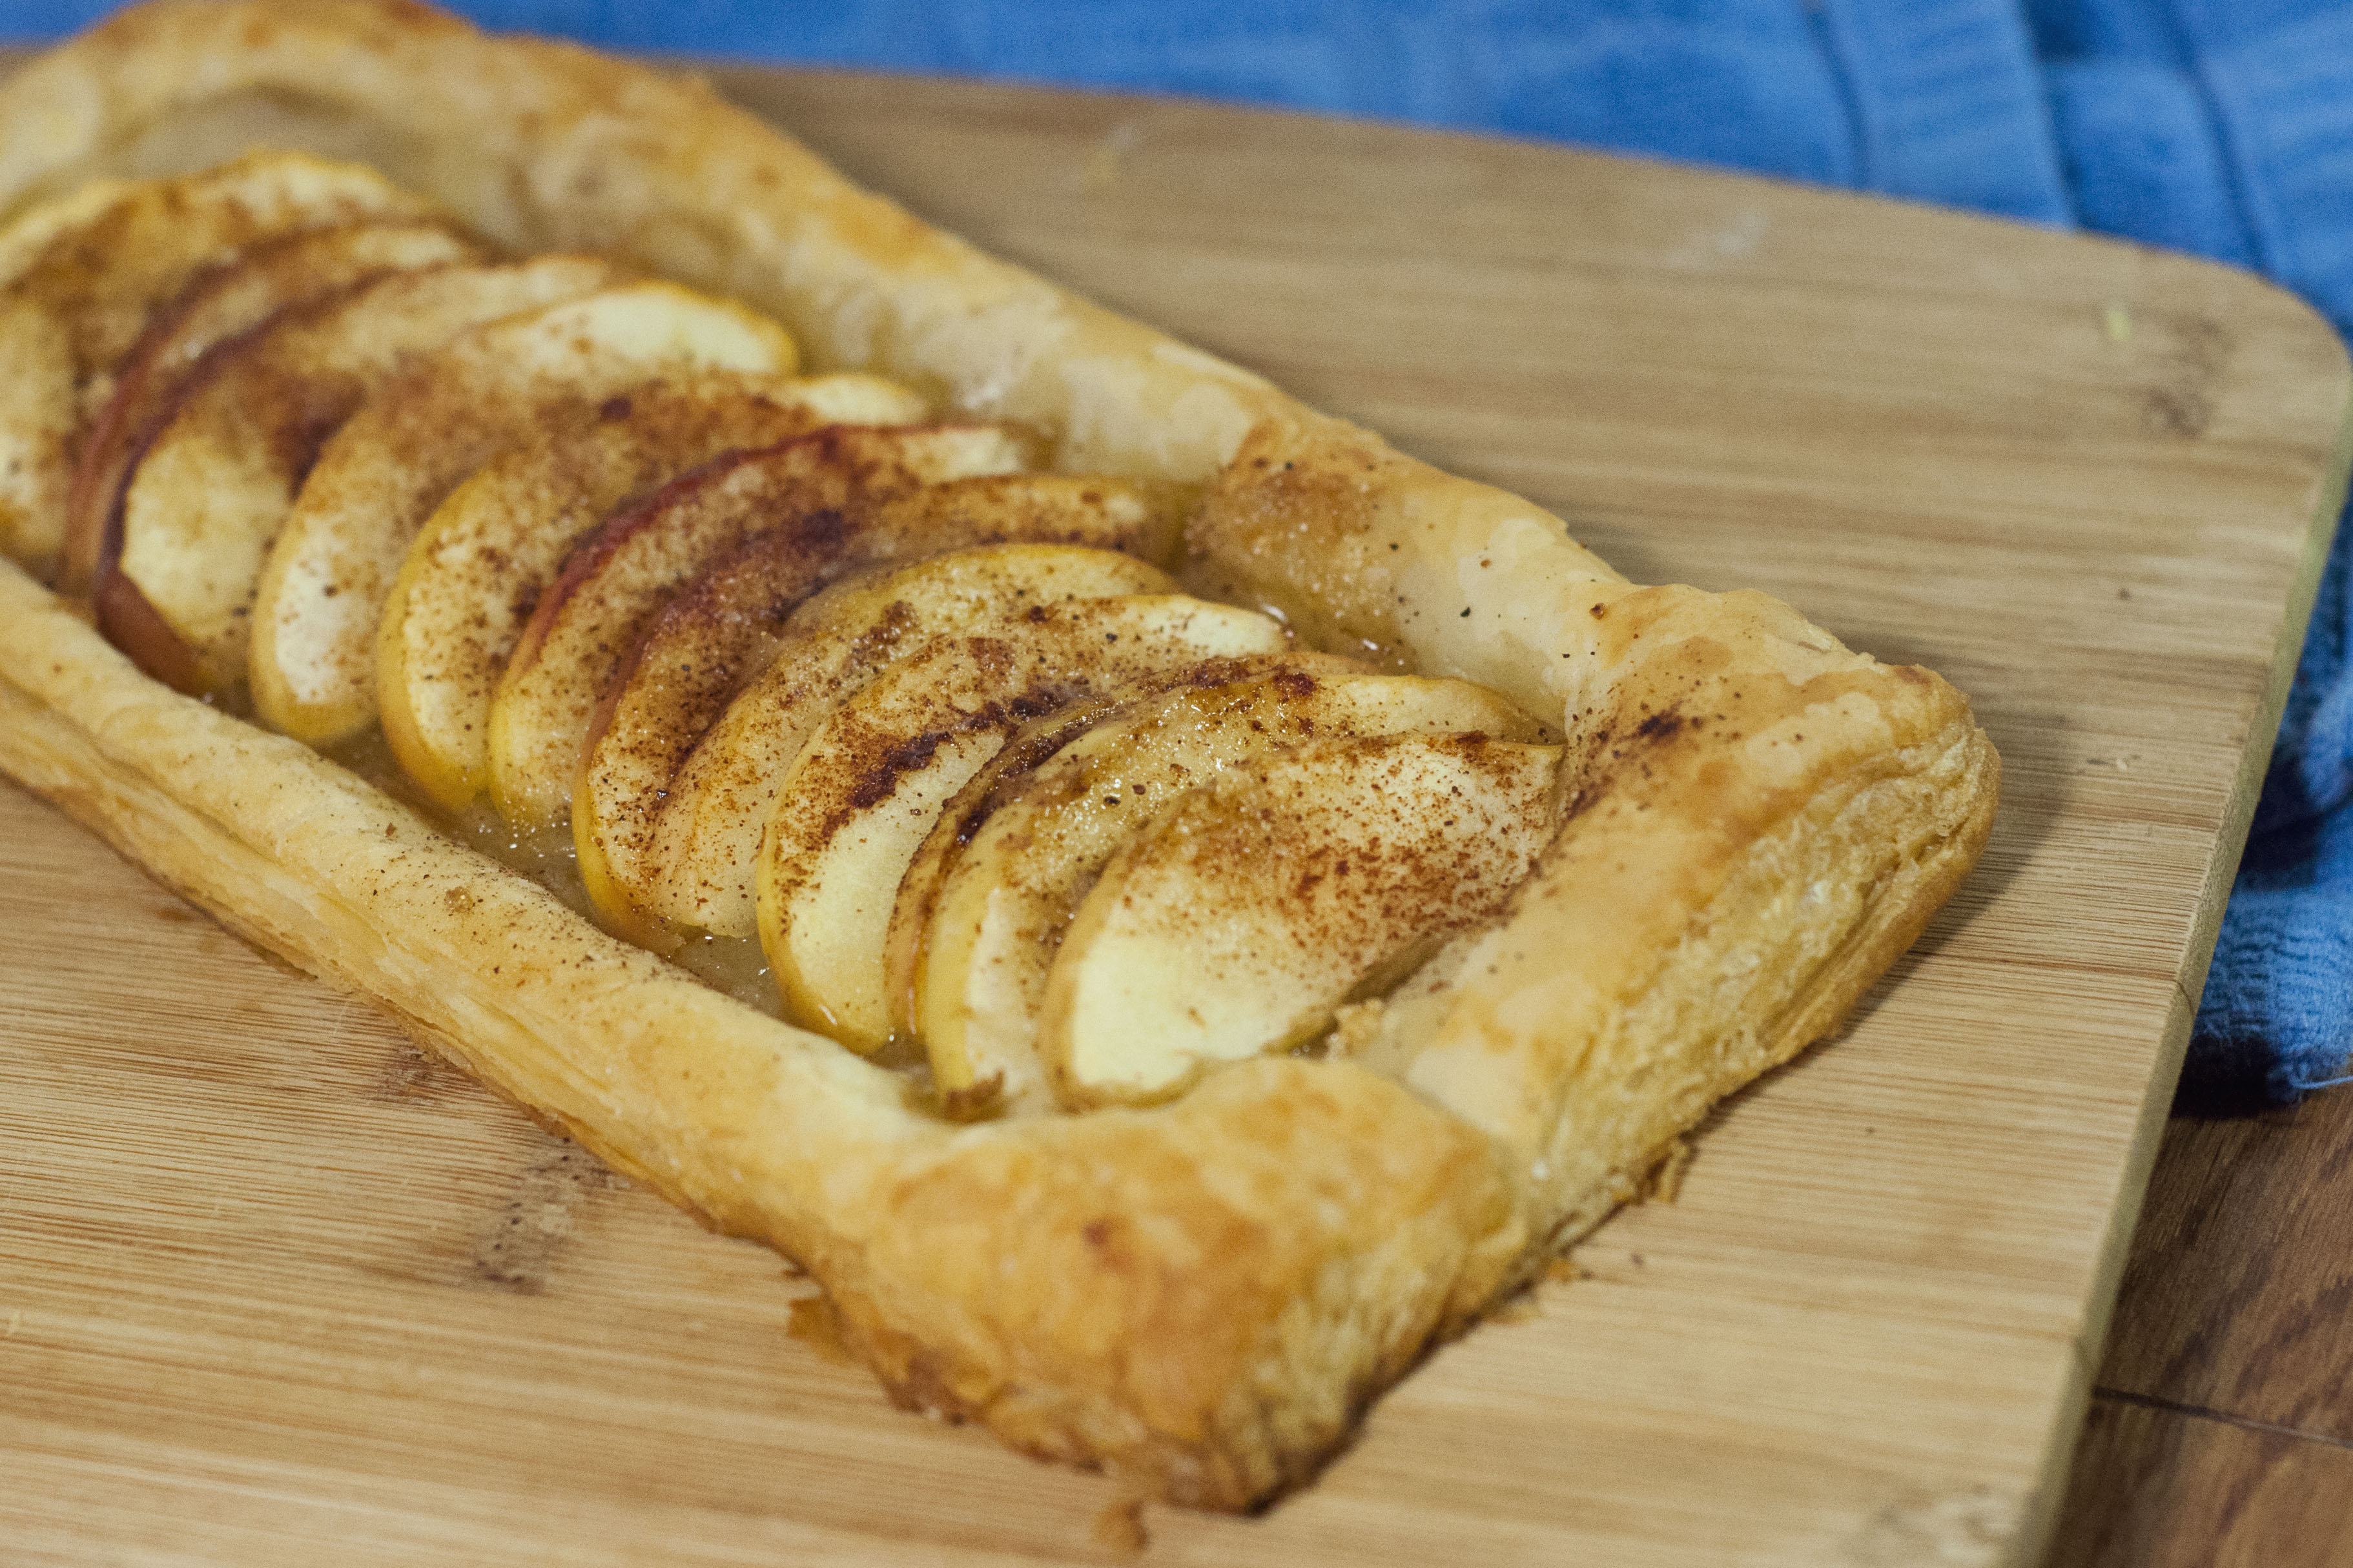 this photo shows an apple tart made with puff pastry from the freezer section